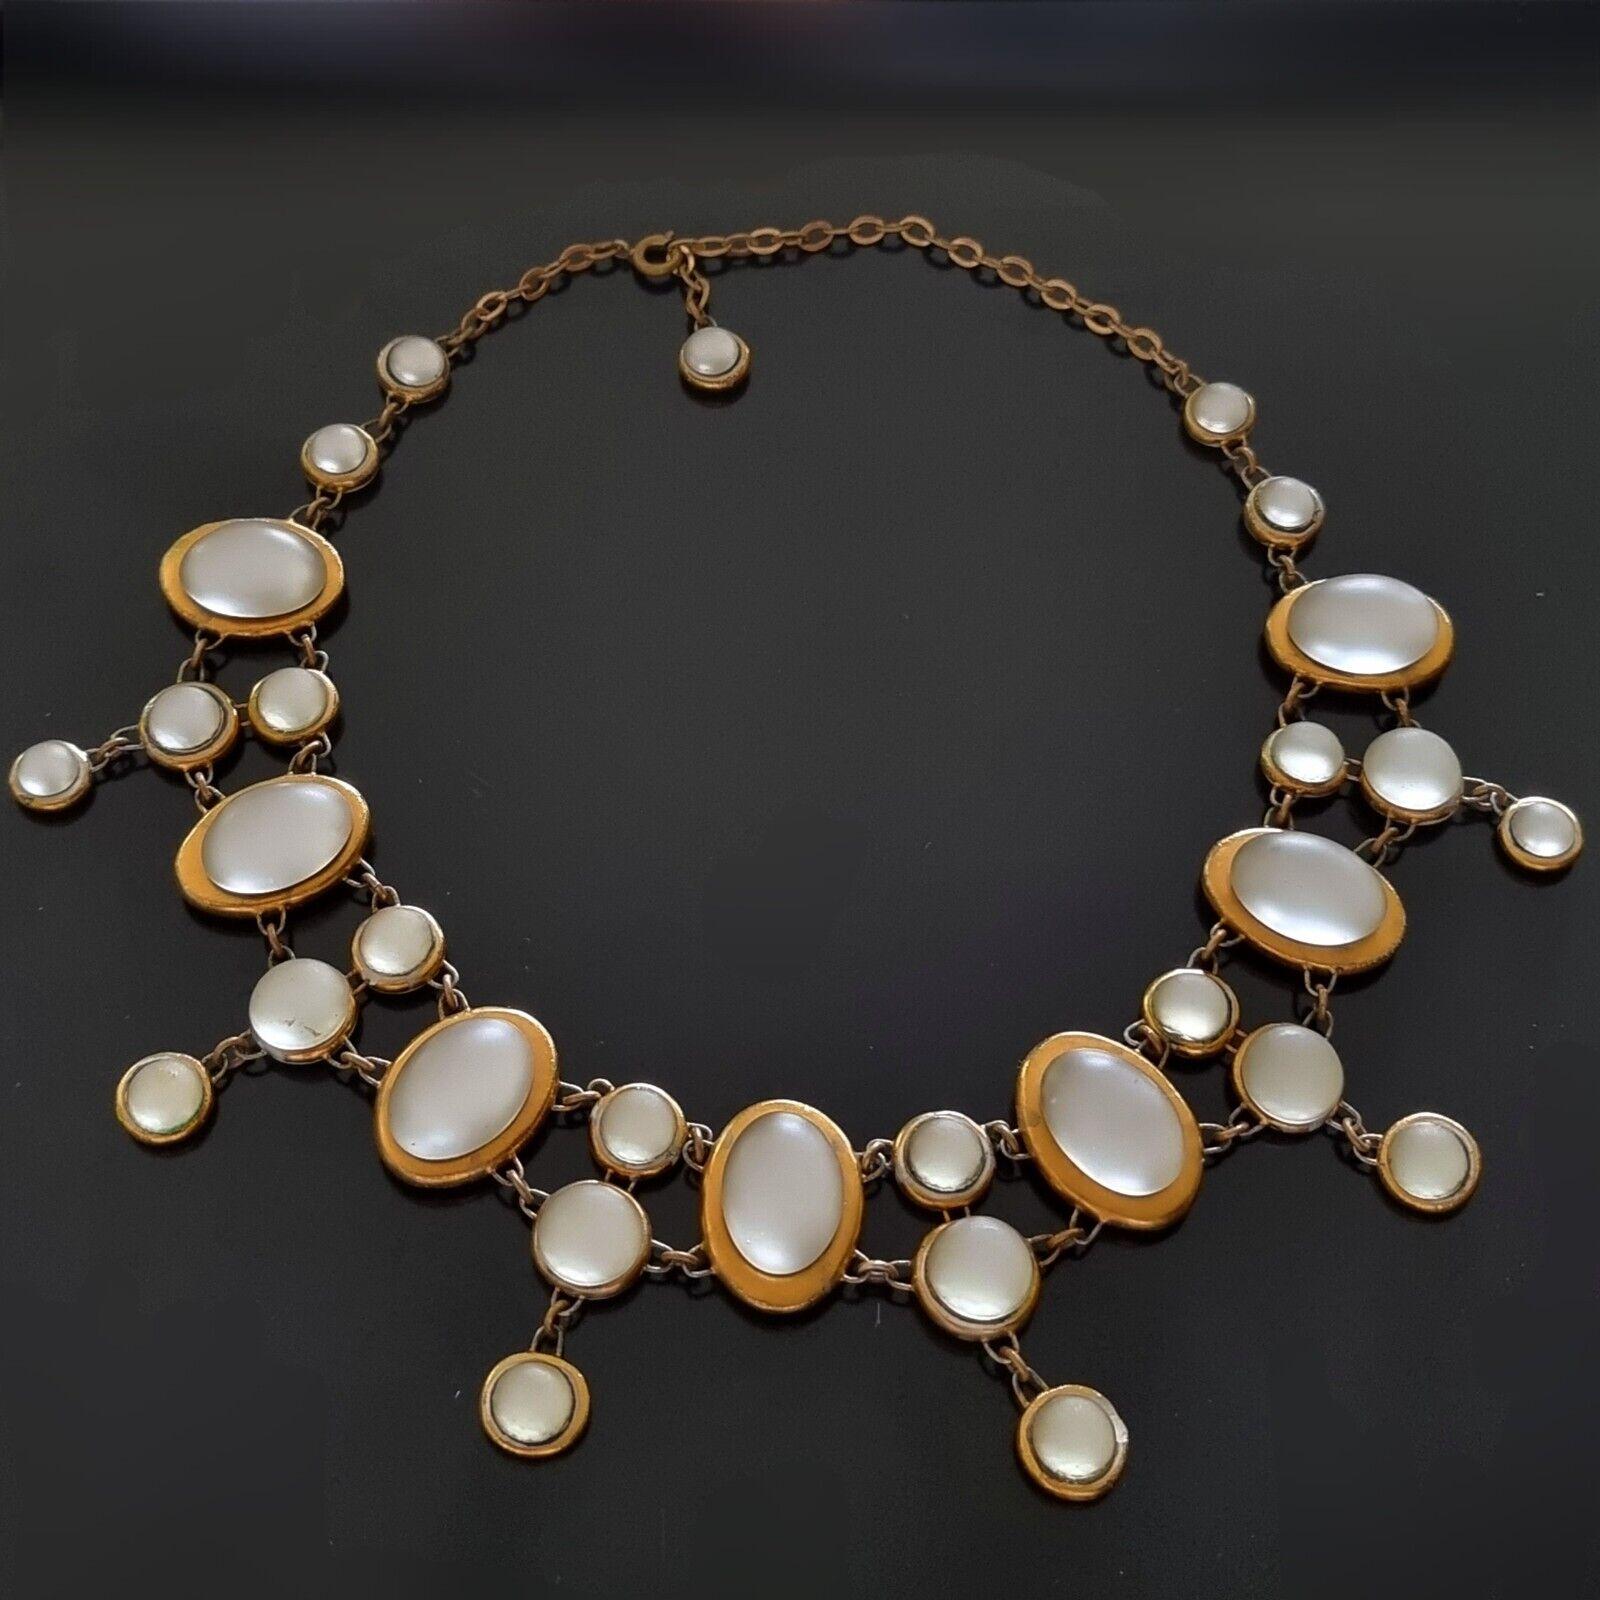 Rare old necklace,
60s vintage,
ceramic and glass,
by Denise Gatard,
collectibles,
total length 47 cm, height 5 cm, weight 60 g,
good condition with traces of time,

Denise Gatard (1908 - 1991) is a famous French ceramist.
A graduate of the School